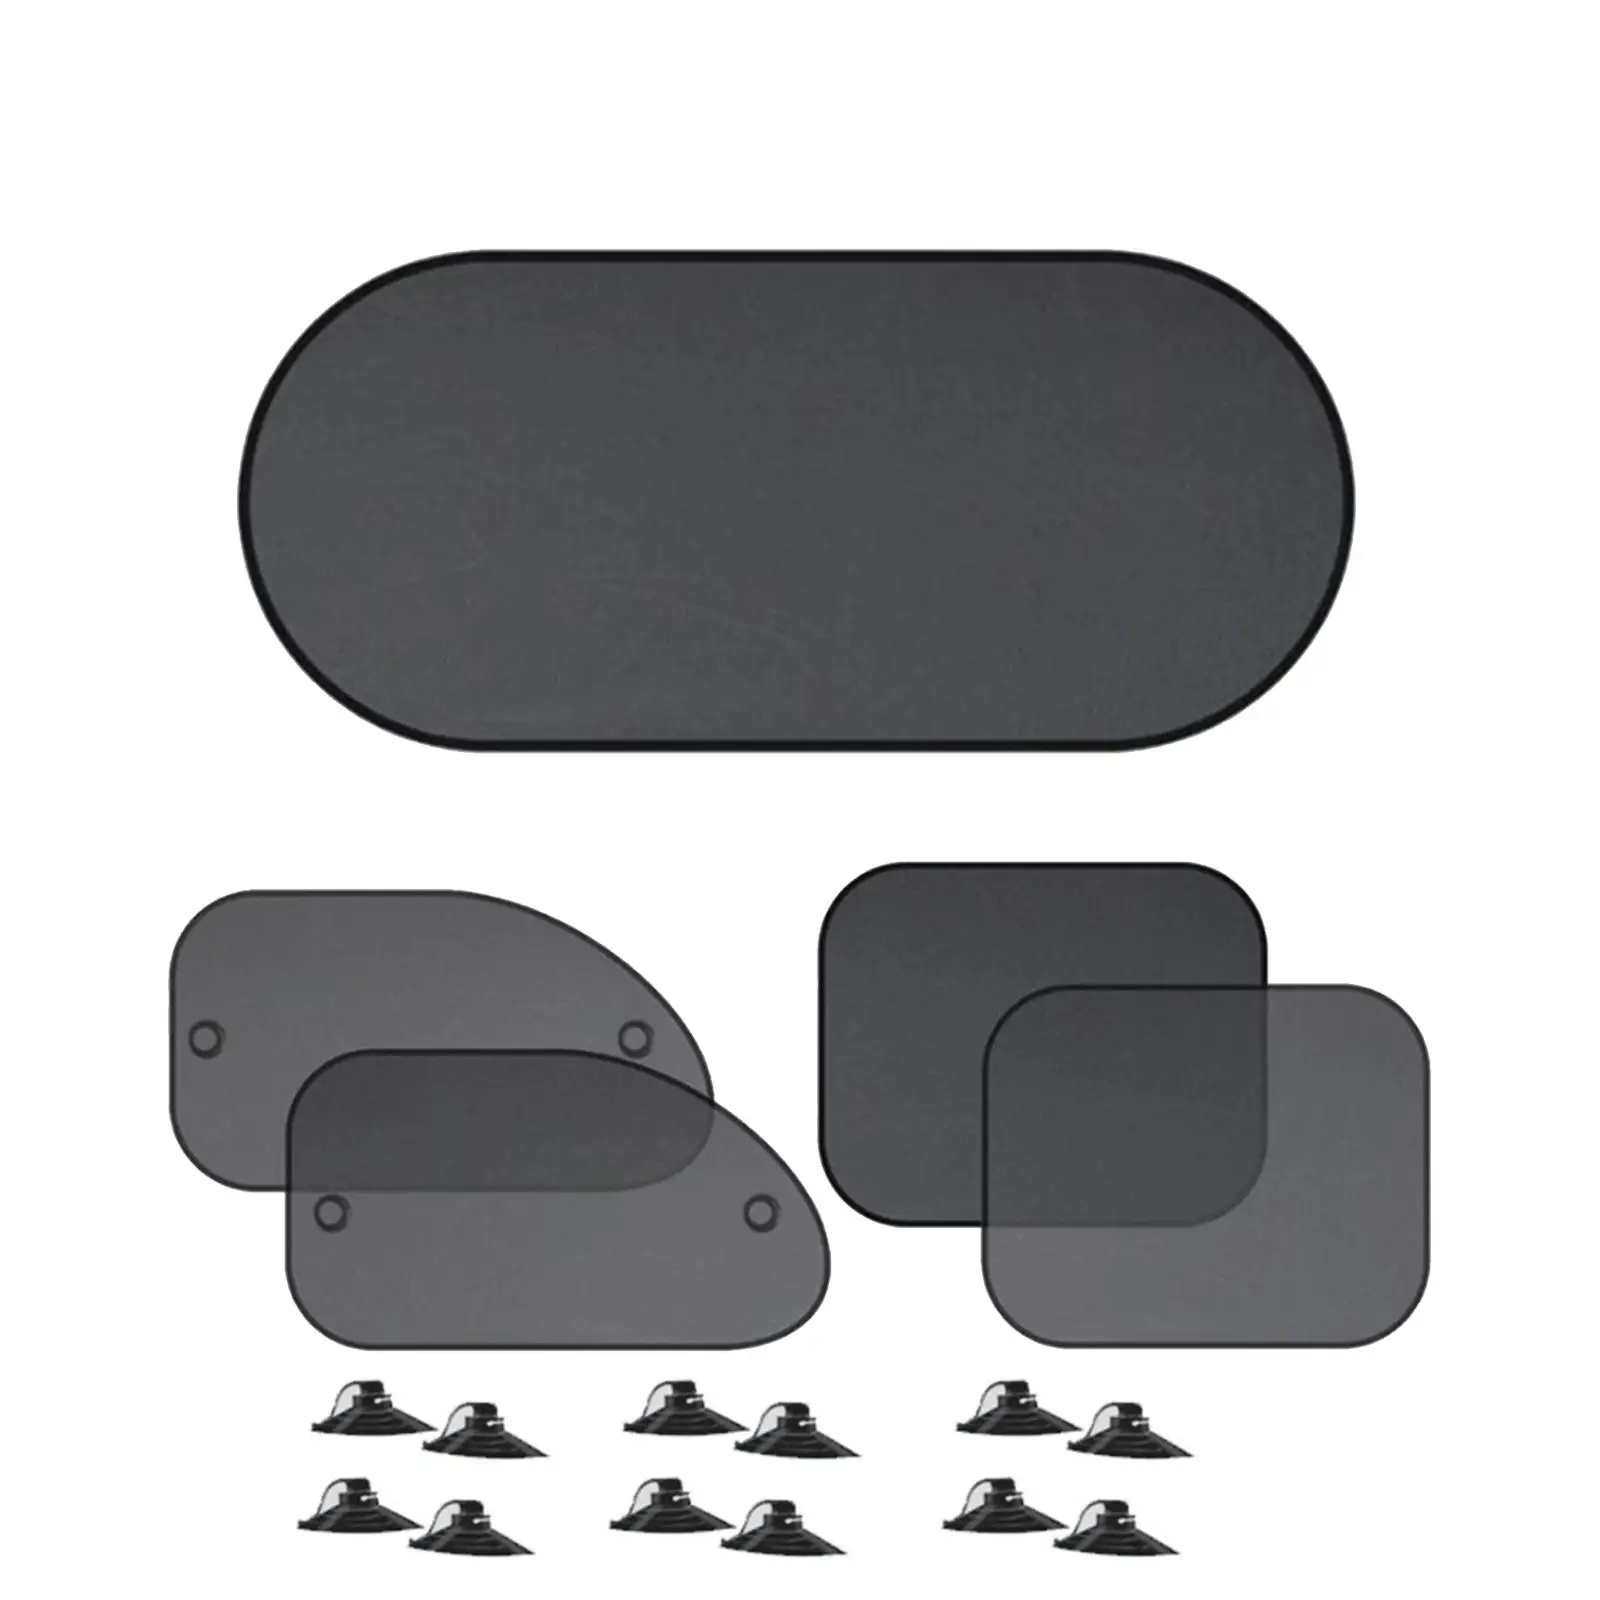 Car Window Sunshade Cover Car Sun Shade Easily Install Vehicle Spare Parts Sun Protection Foldable with Suction Cups Breathable